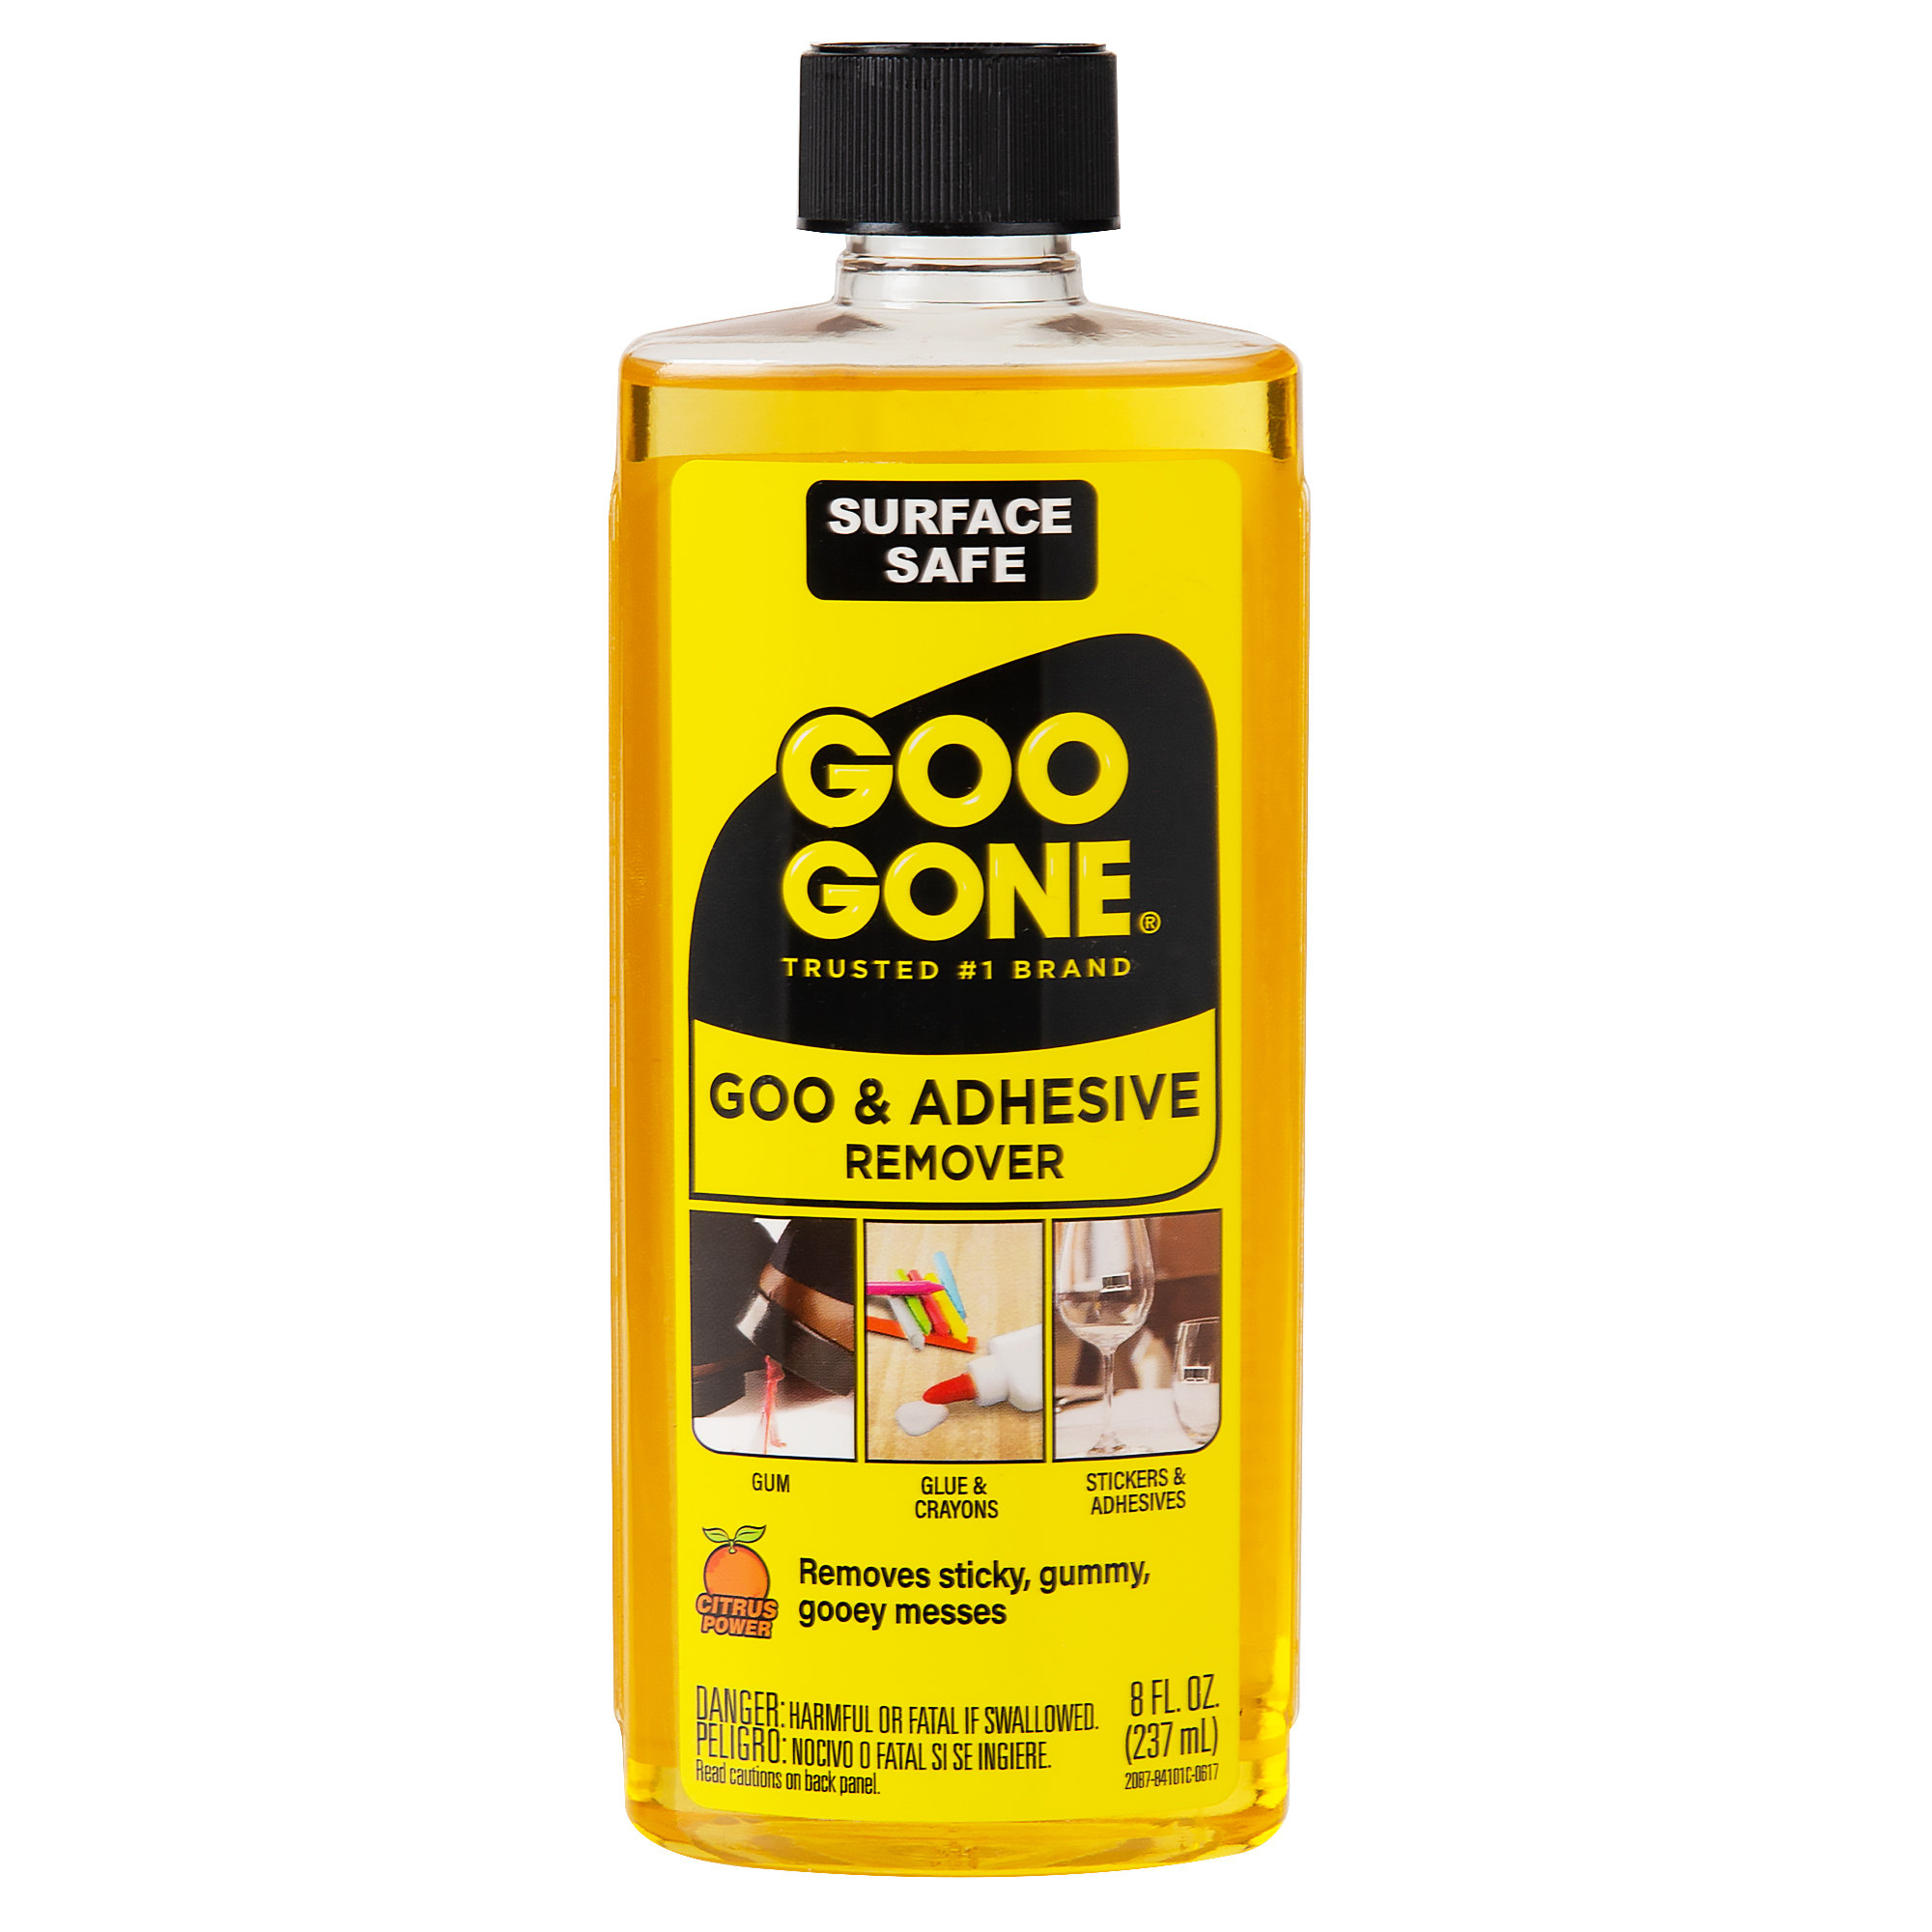 Goo Gone All-Purpose Cleaner - 32 Ounce - Removes Dirt, Grease, Grime,  Multi Surface, Multi Purpose, De-Greaser, Cleaning Spray - 2 PACK 